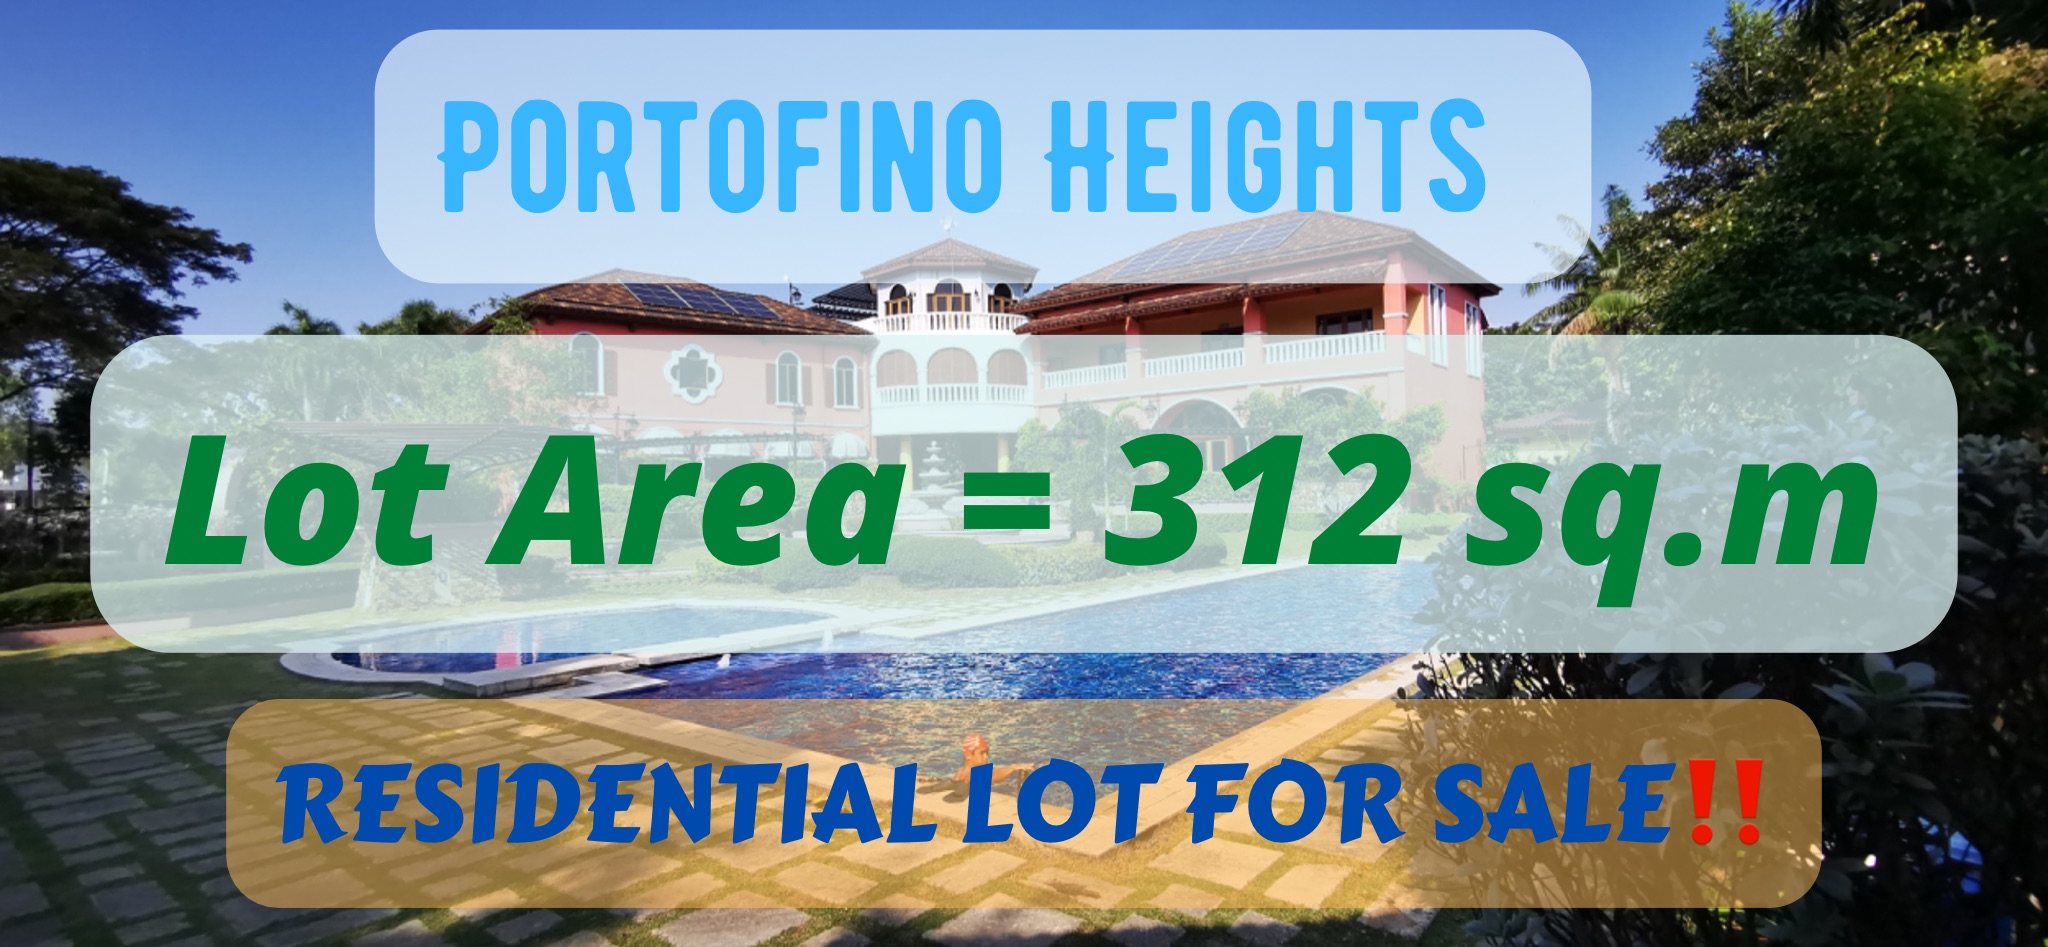 Portofino Heights – Residential Lot for Sale‼️